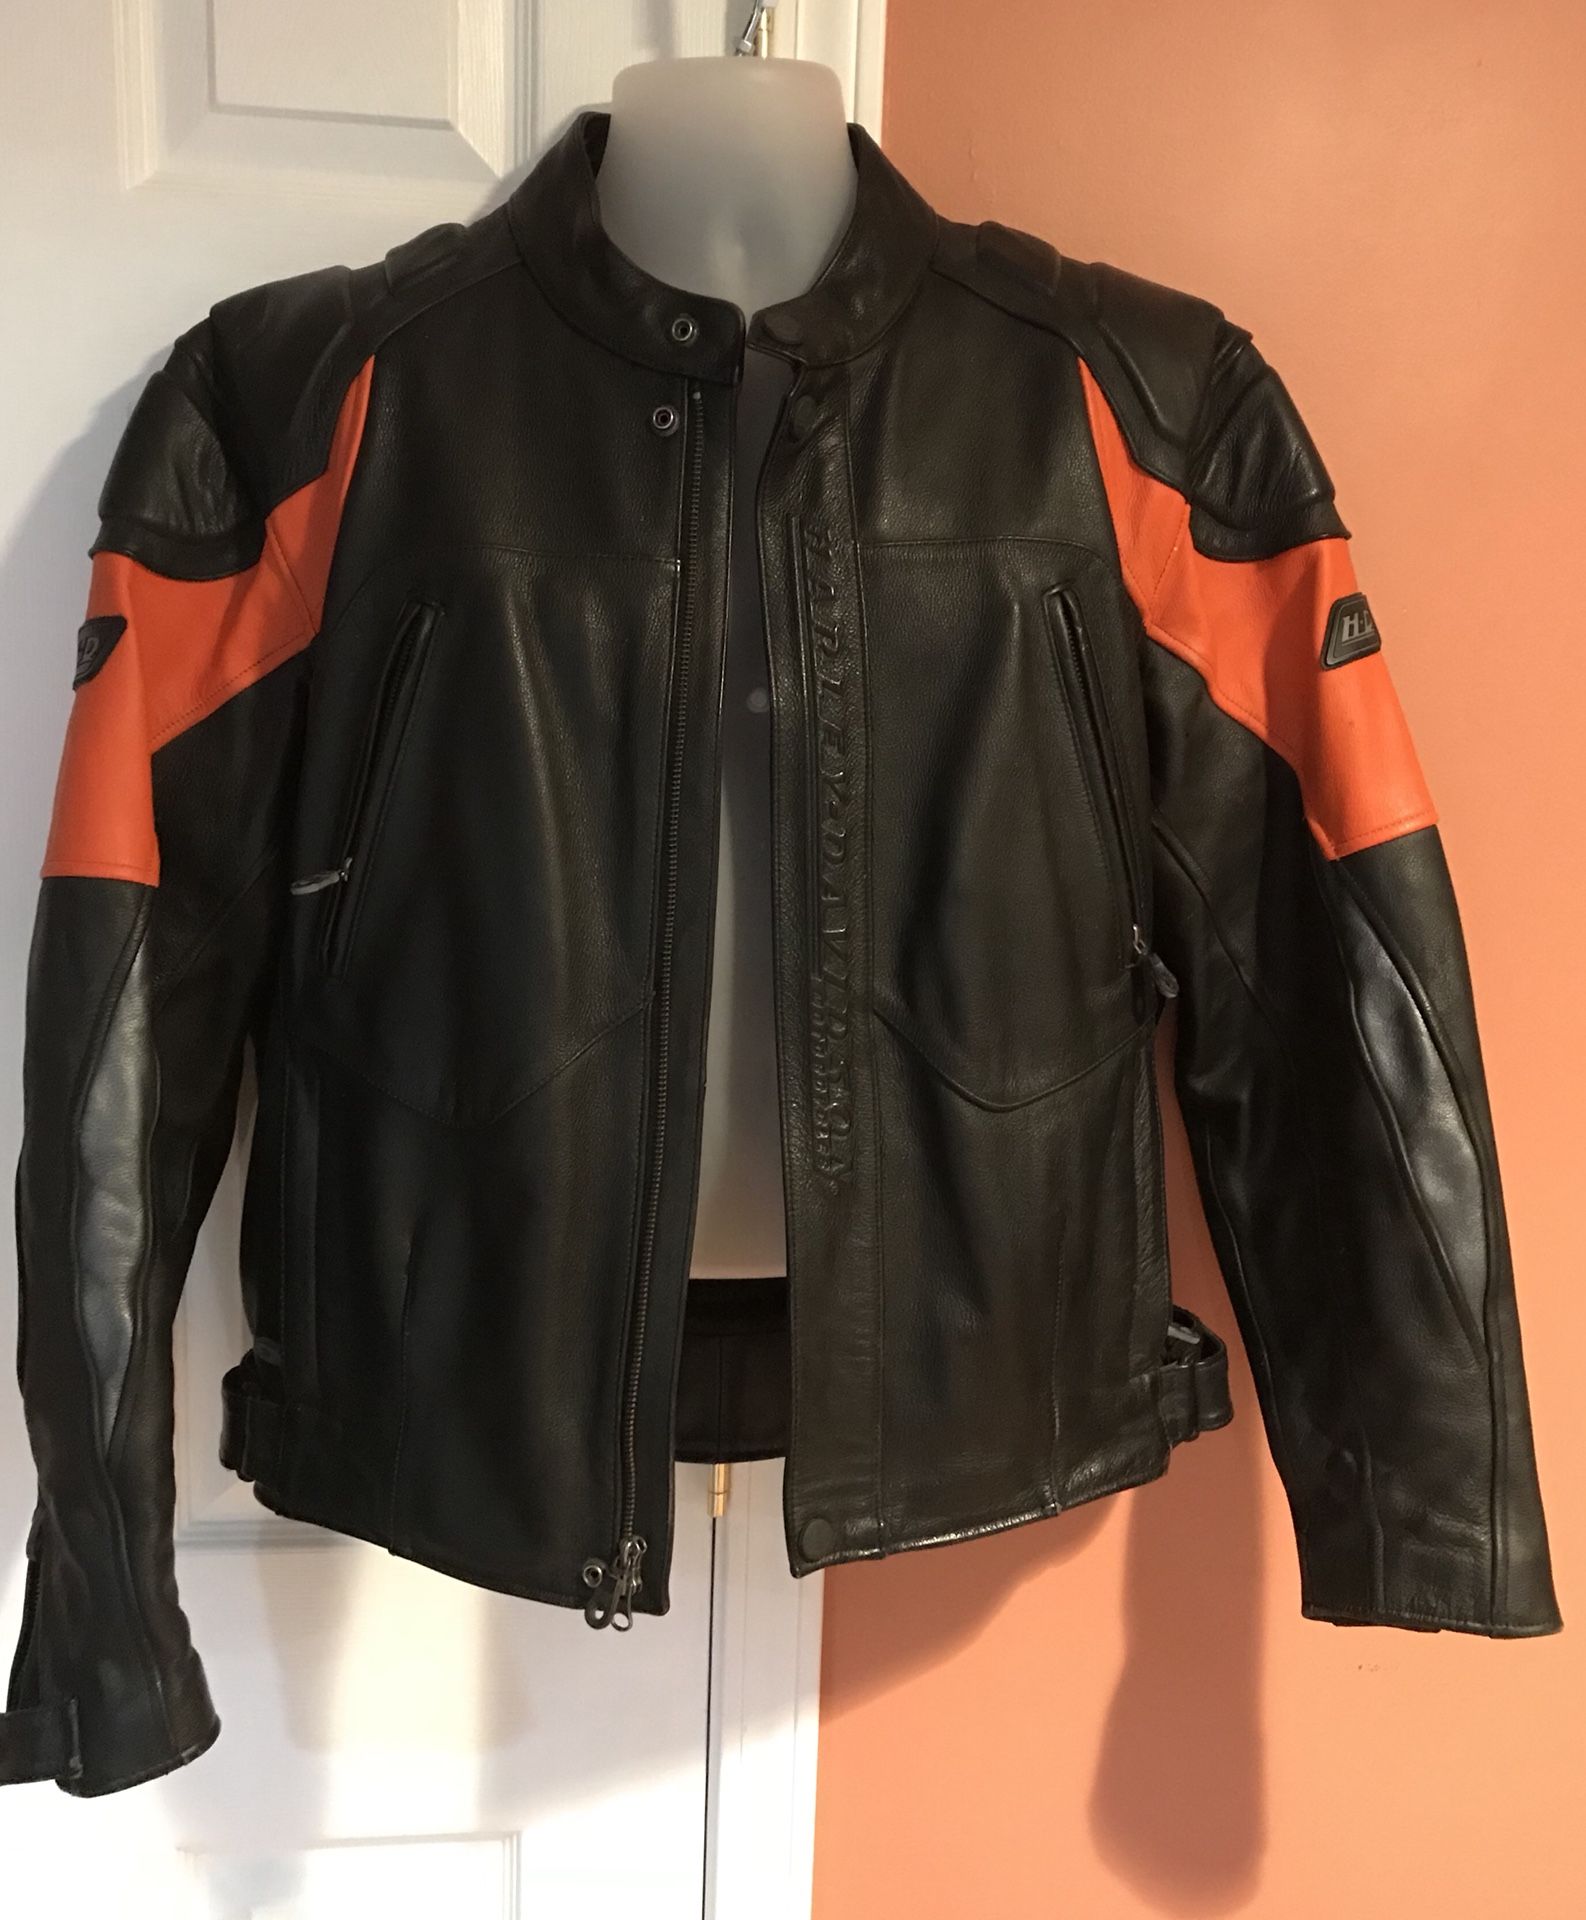 Authentic Harley Davidson Leather Jacket (shoulders, elbows, front and back padded), size L